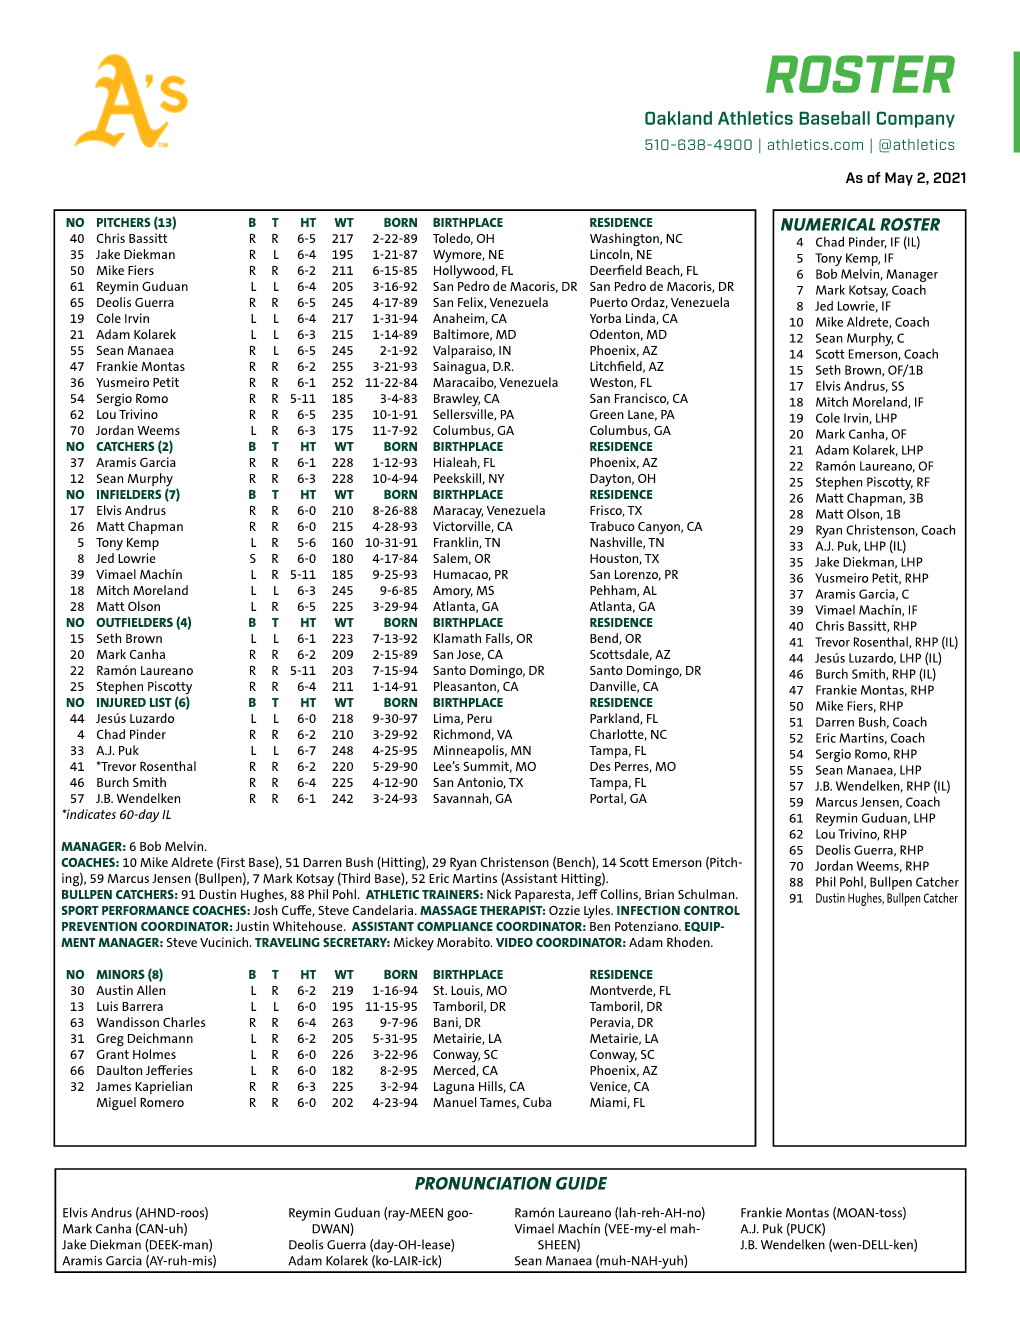 05-02-2021 A's Roster